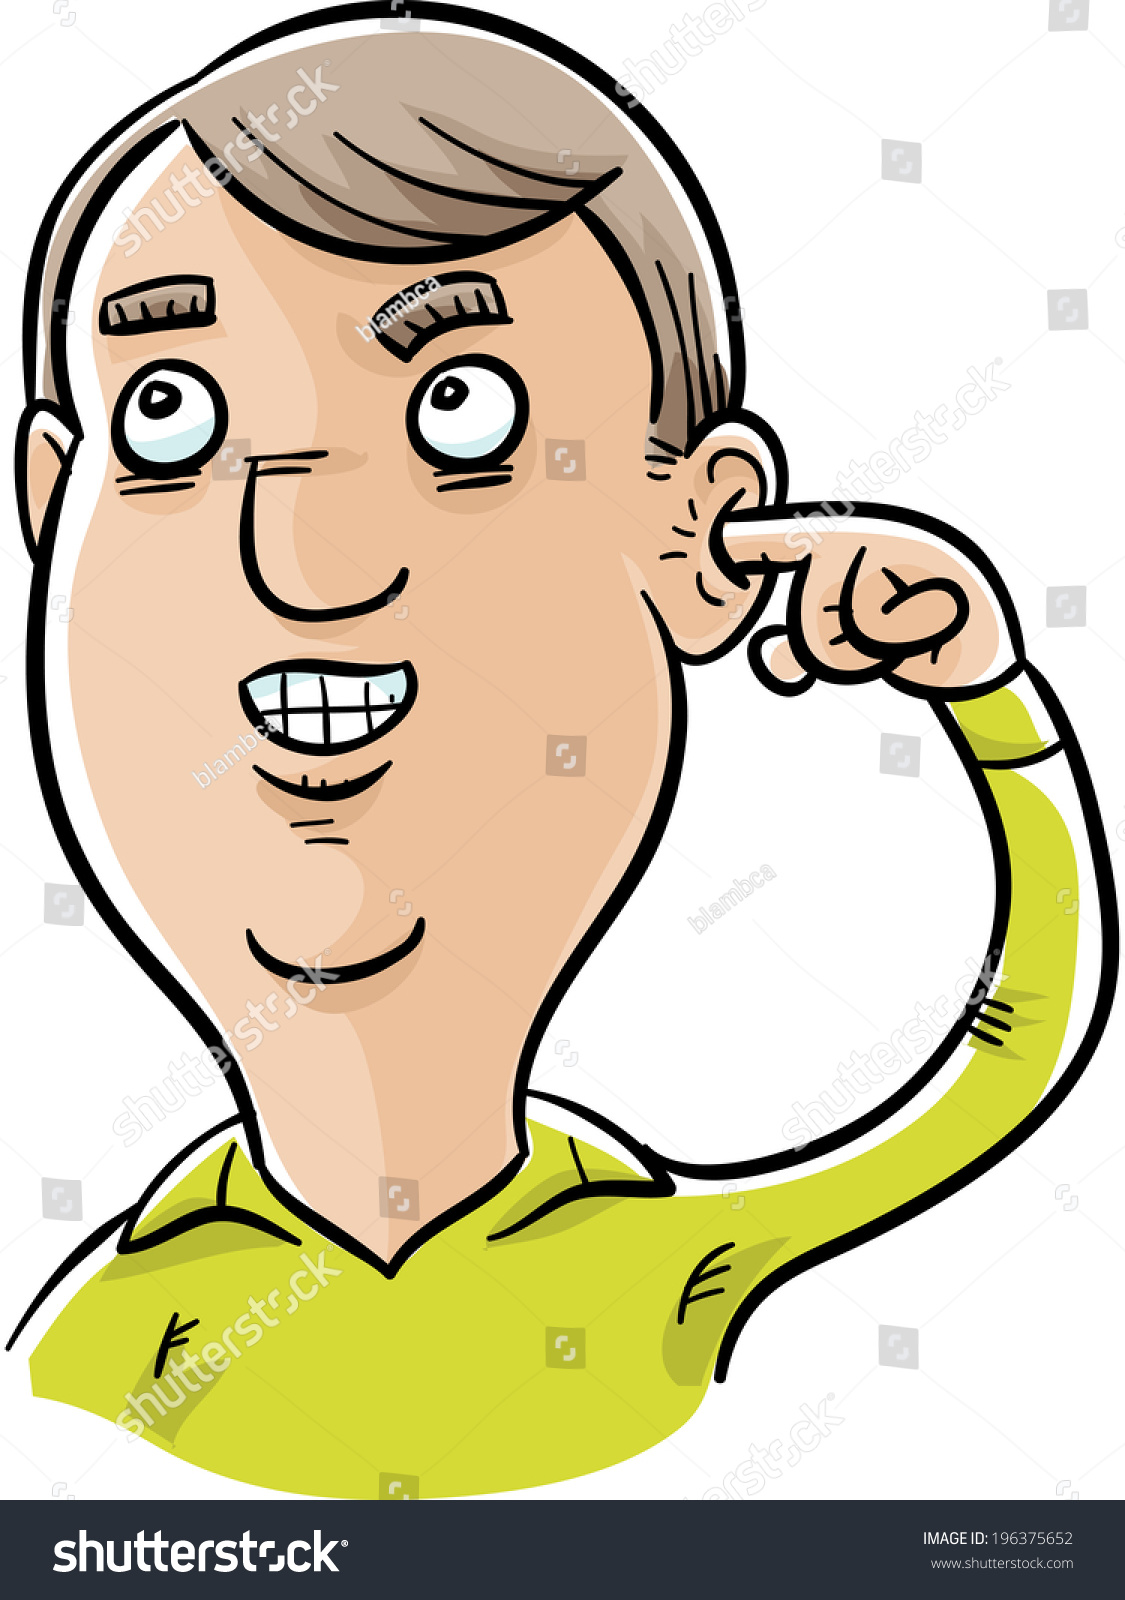 A Cartoon Man Picking His Ear With His Finger. Stock ...